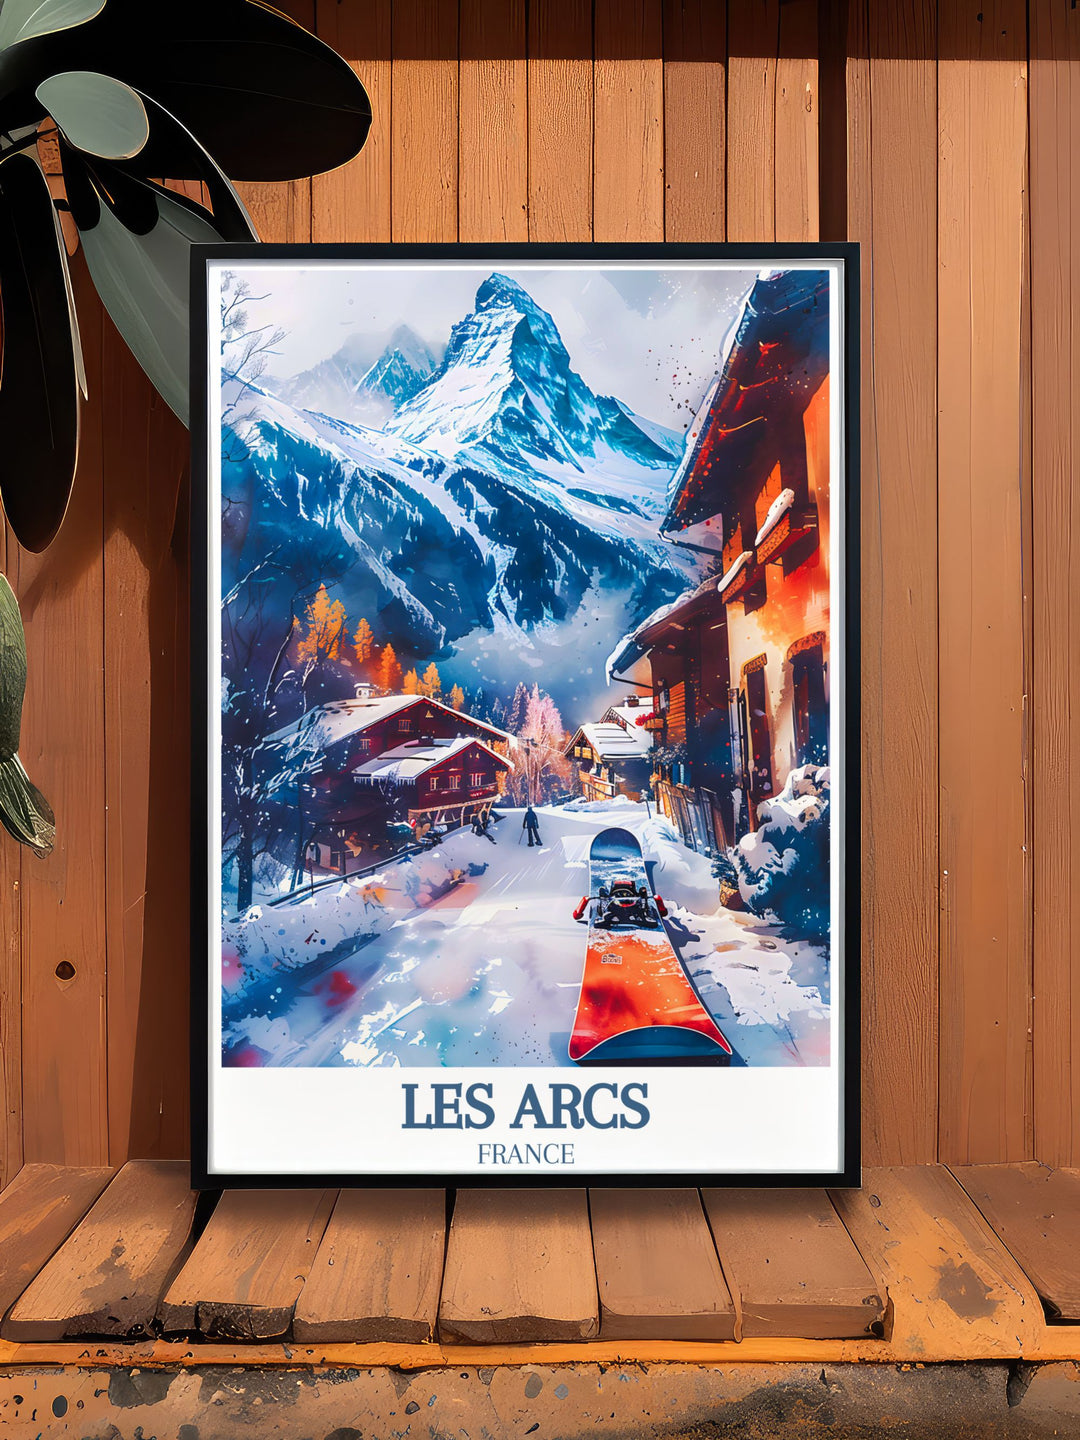 Paradiski ski area Les Arcs Ski resort Mont Blanc poster highlighting dynamic snowboarding scenes perfect for bringing the excitement of the French Alps into your living space and wall art collection